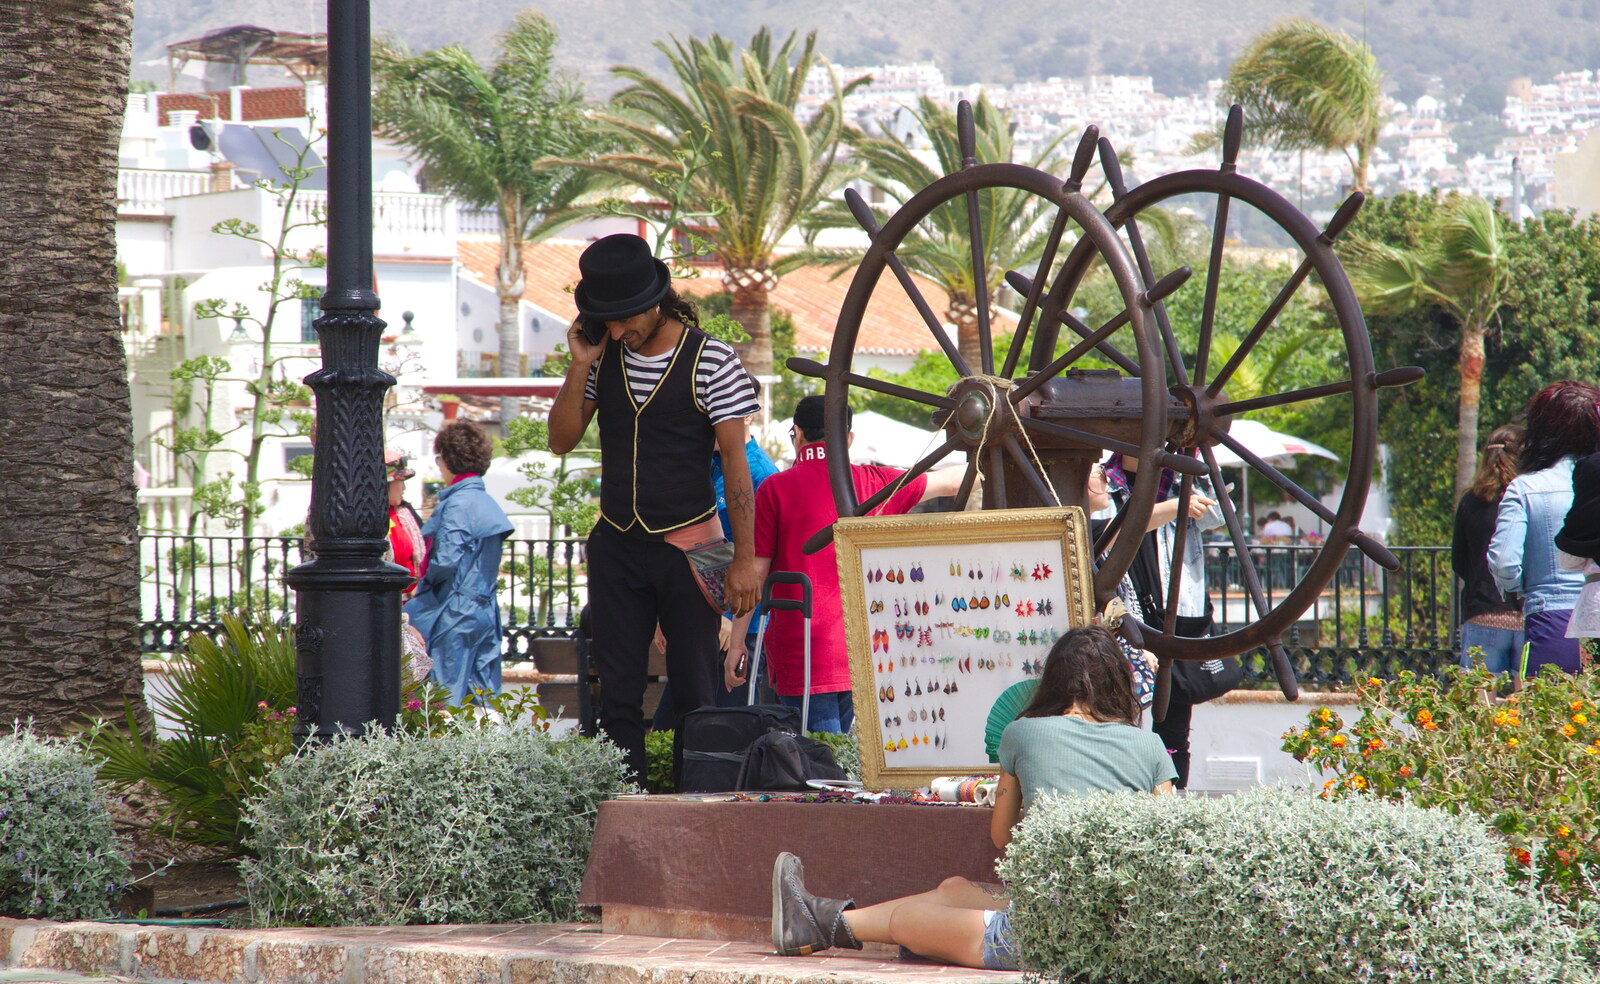 Some street-performer types hang around from Torrecilla Beach and the Nerja Museum, Andalusia, Spain - 17th April 2019